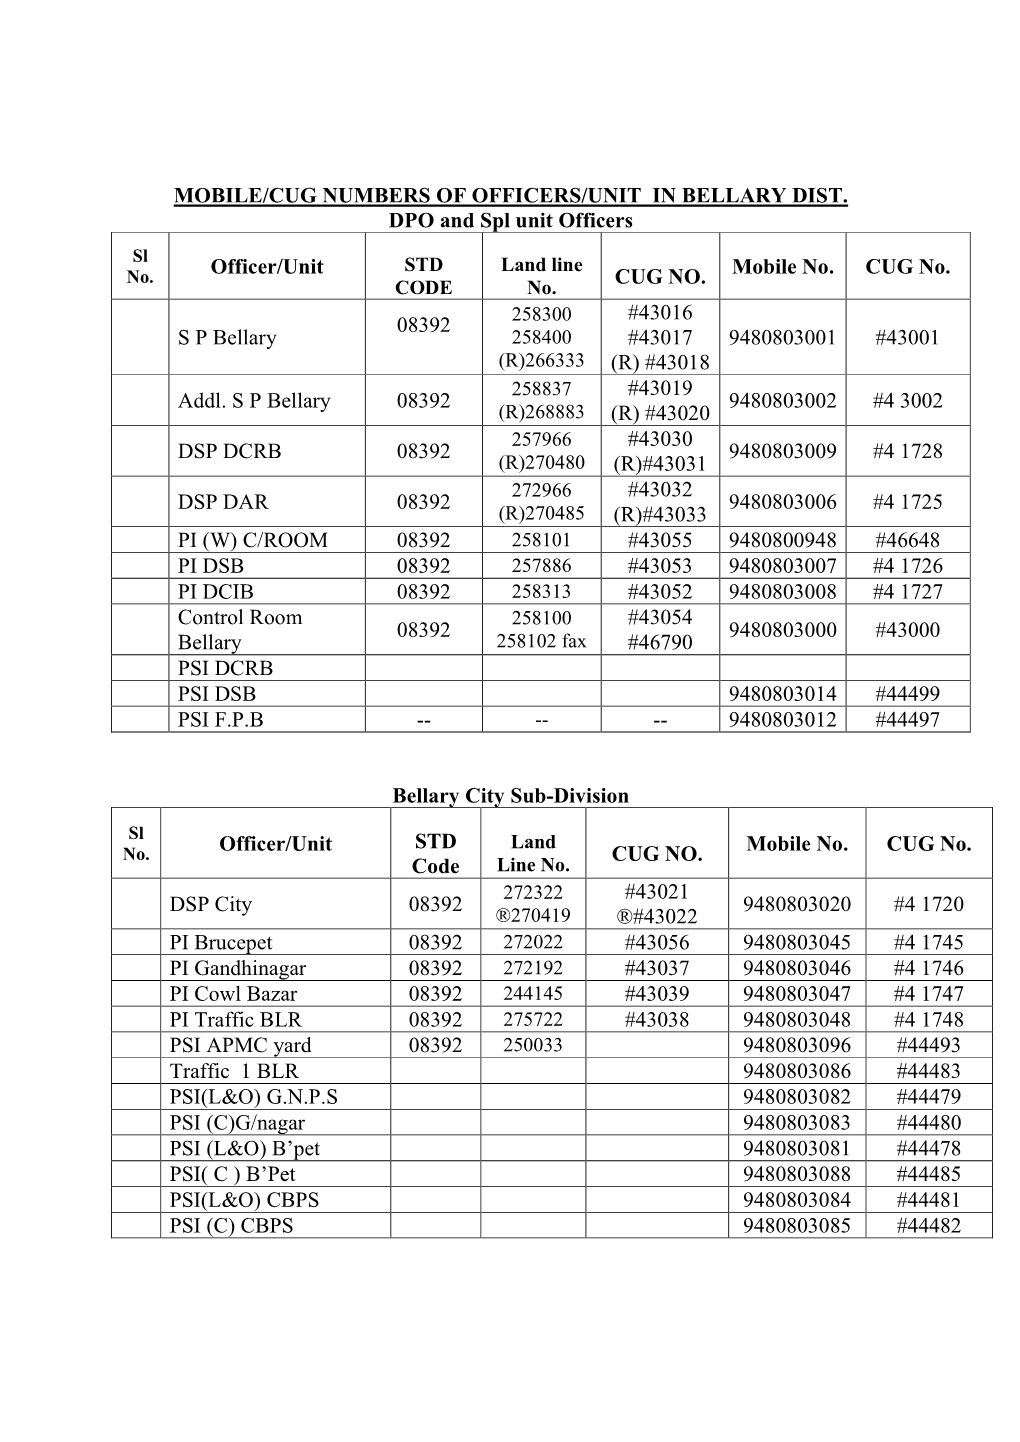 Mobile/Cug Numbers of Officers/Unit in Bellary Dist